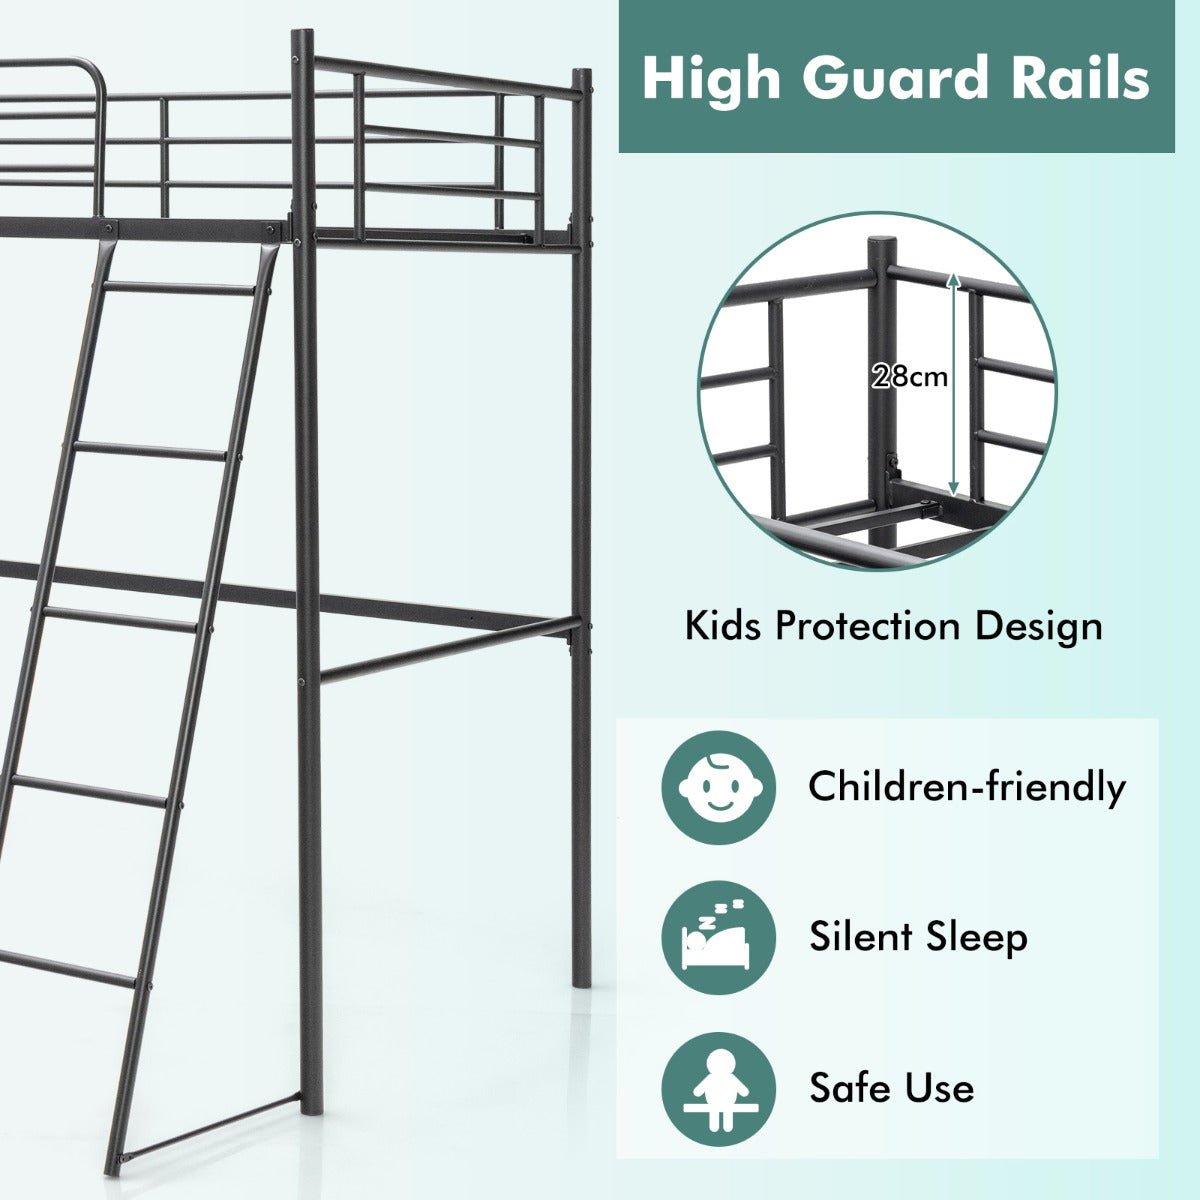 Heavy-duty Steel Bed Frame with High Guard Rails for Relaxation